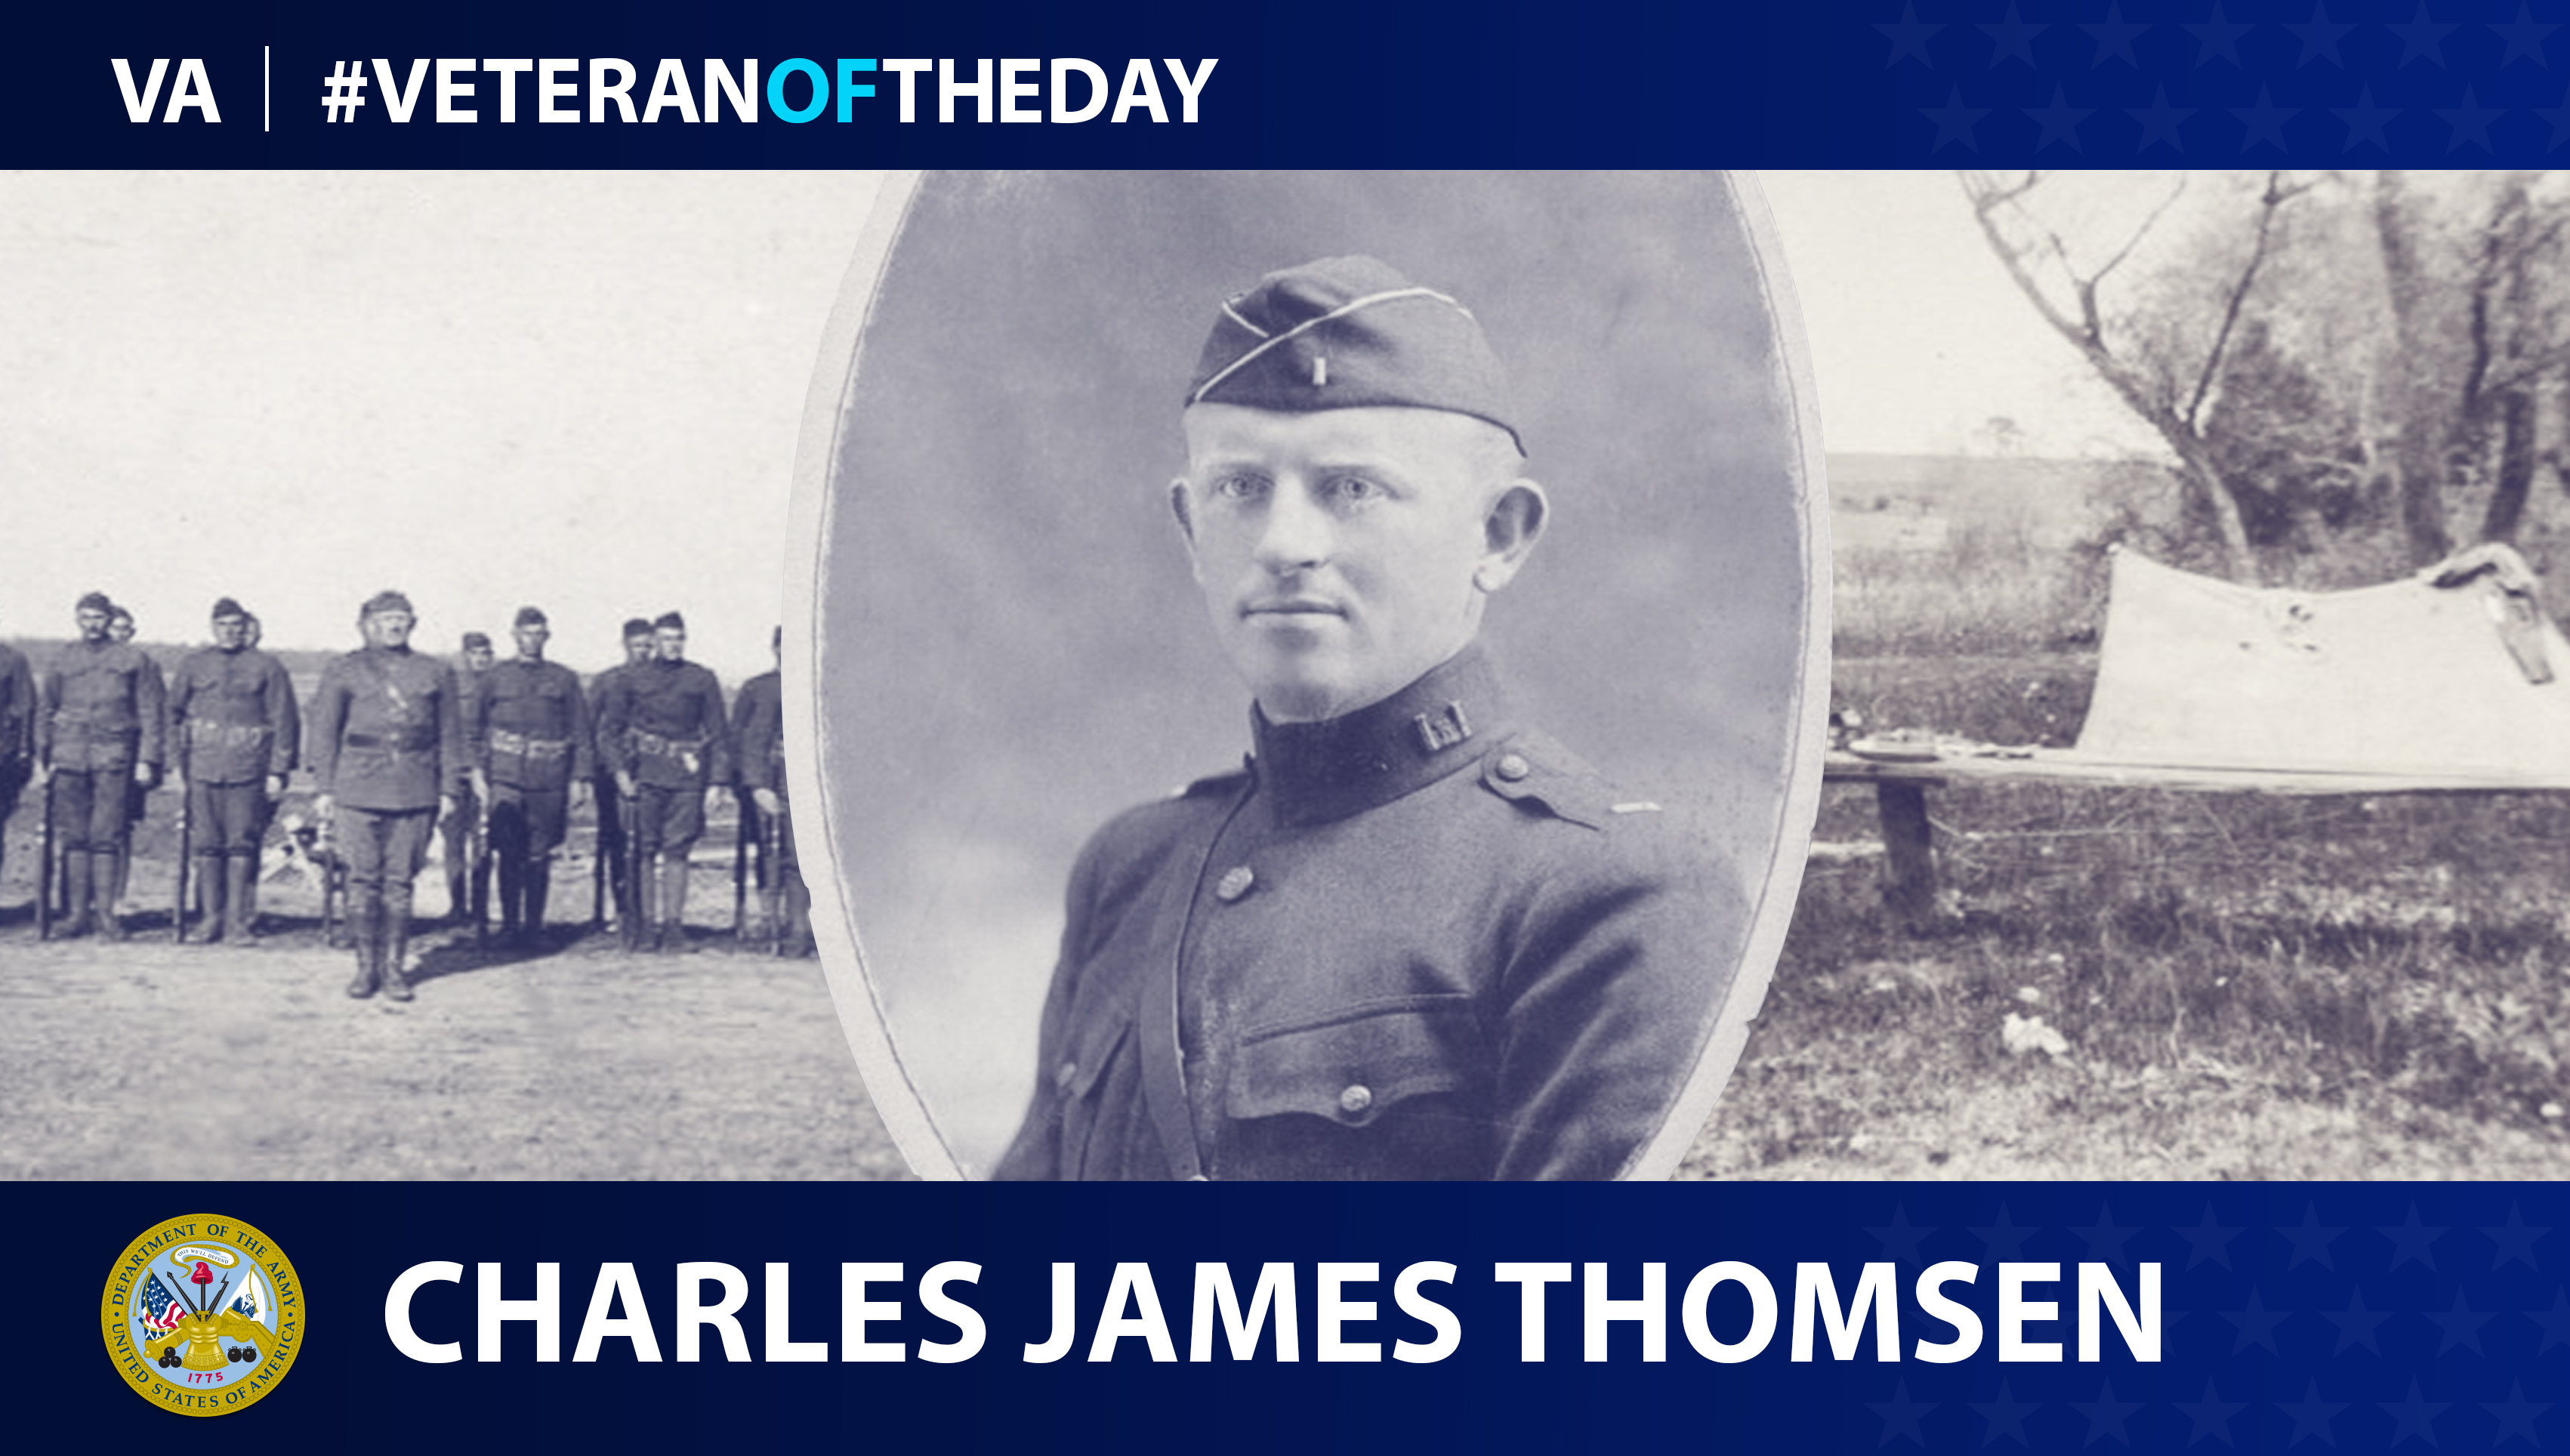 Army Veteran Charles James Thomsen is today's Veteran of the Day.